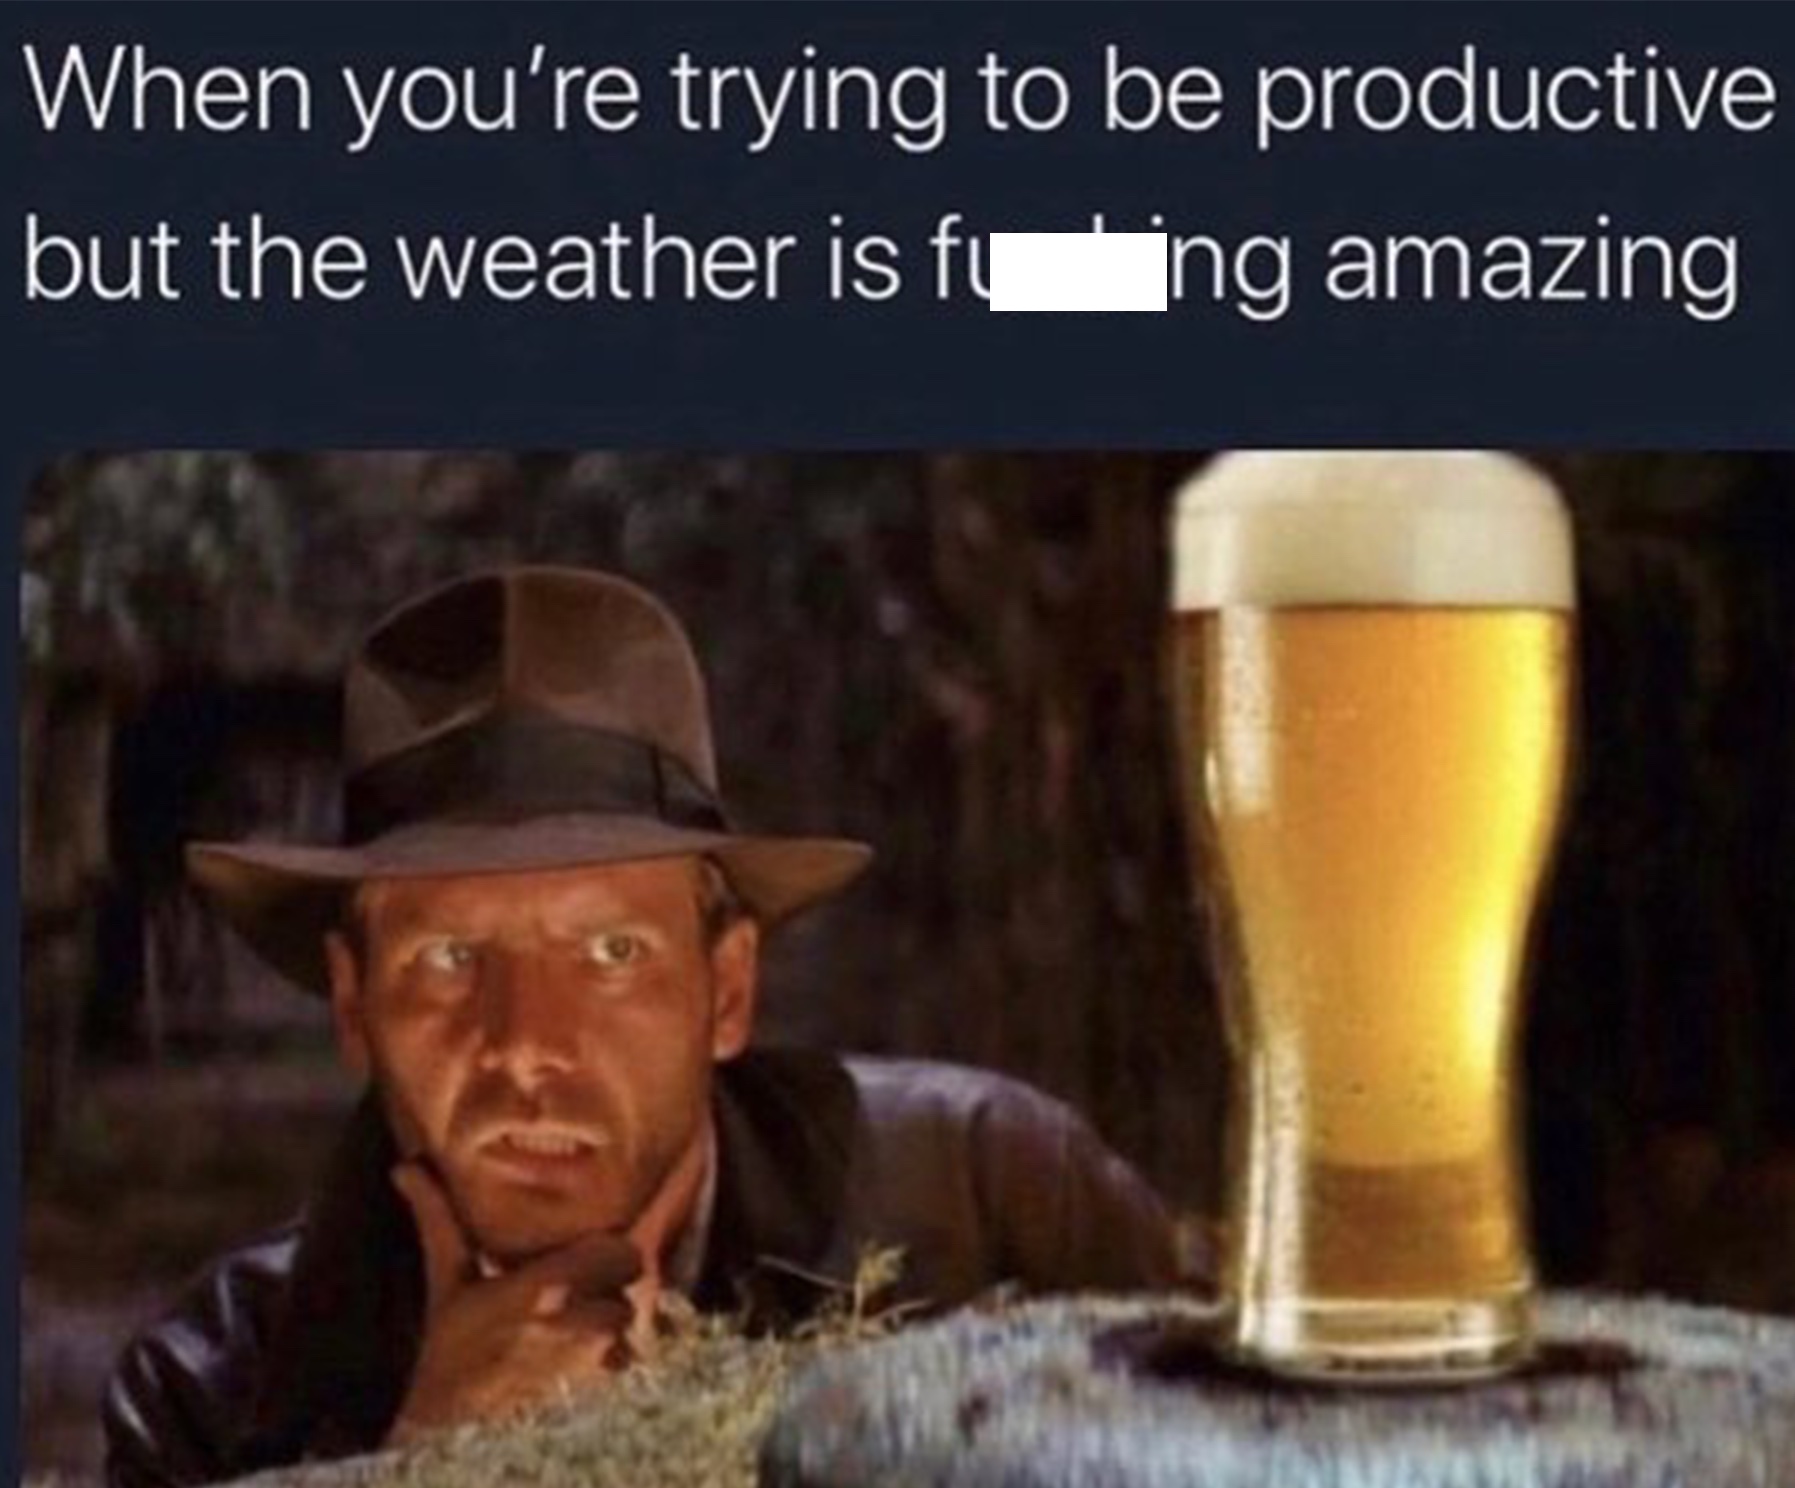 dad memes - indiana jones and the raiders - When you're trying to be productive but the weather is feing amazing